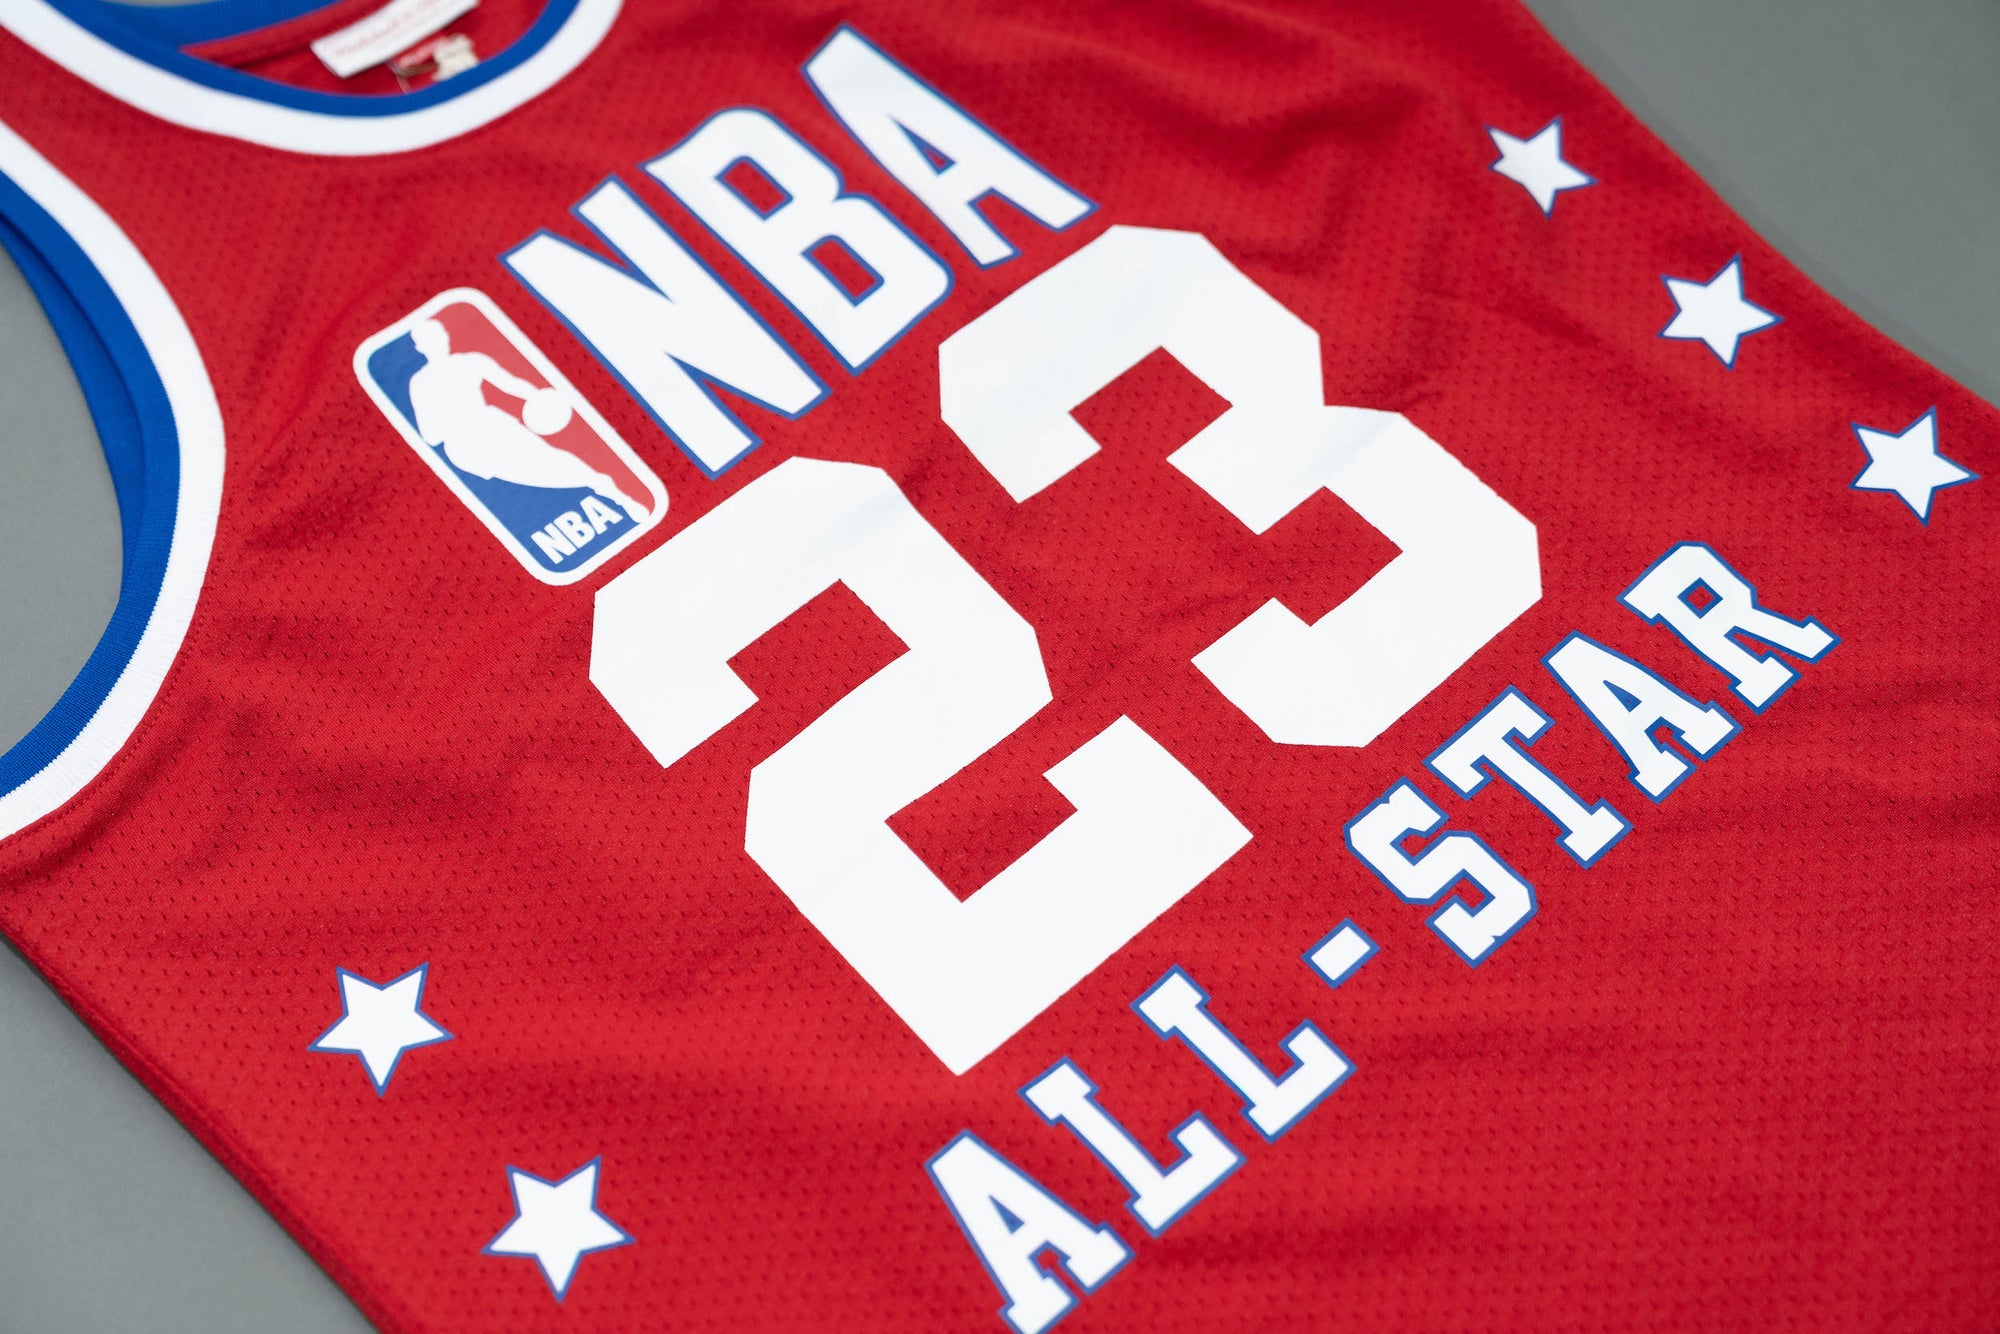 Mitchell & Ness All-Star Game NBA Shirts for sale